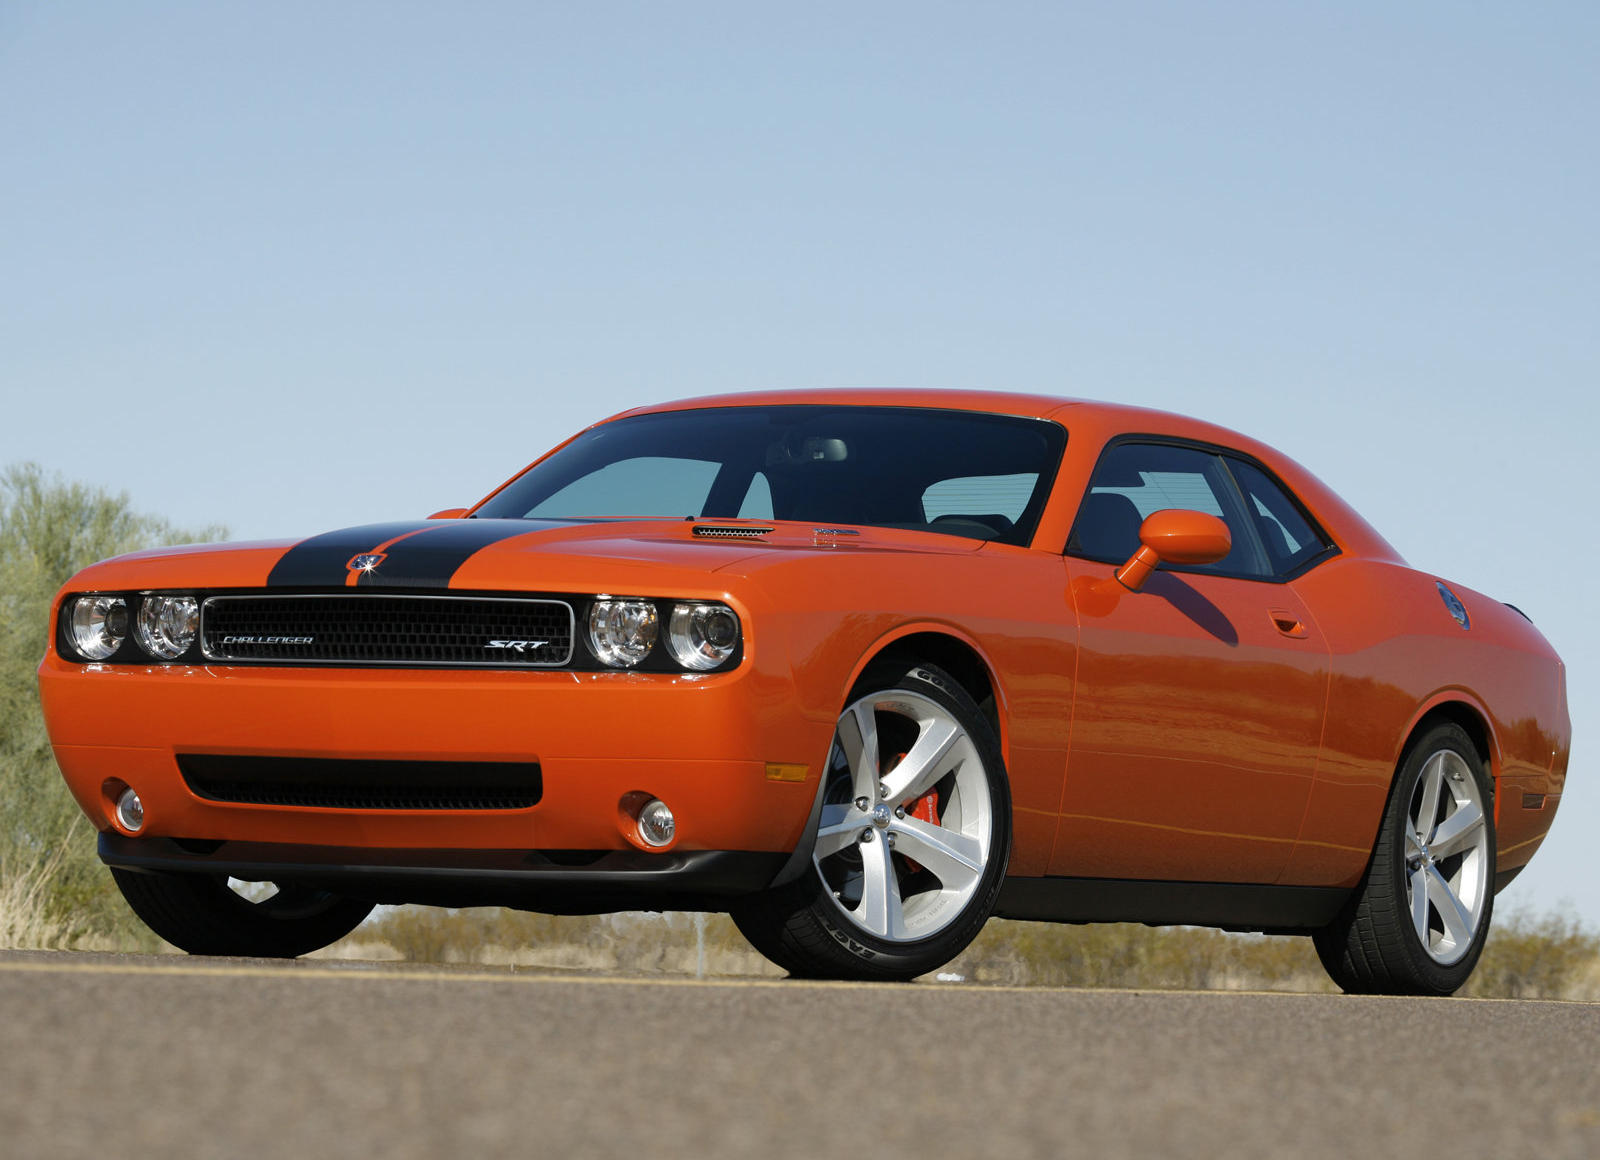 2010 dodge challenger reliability